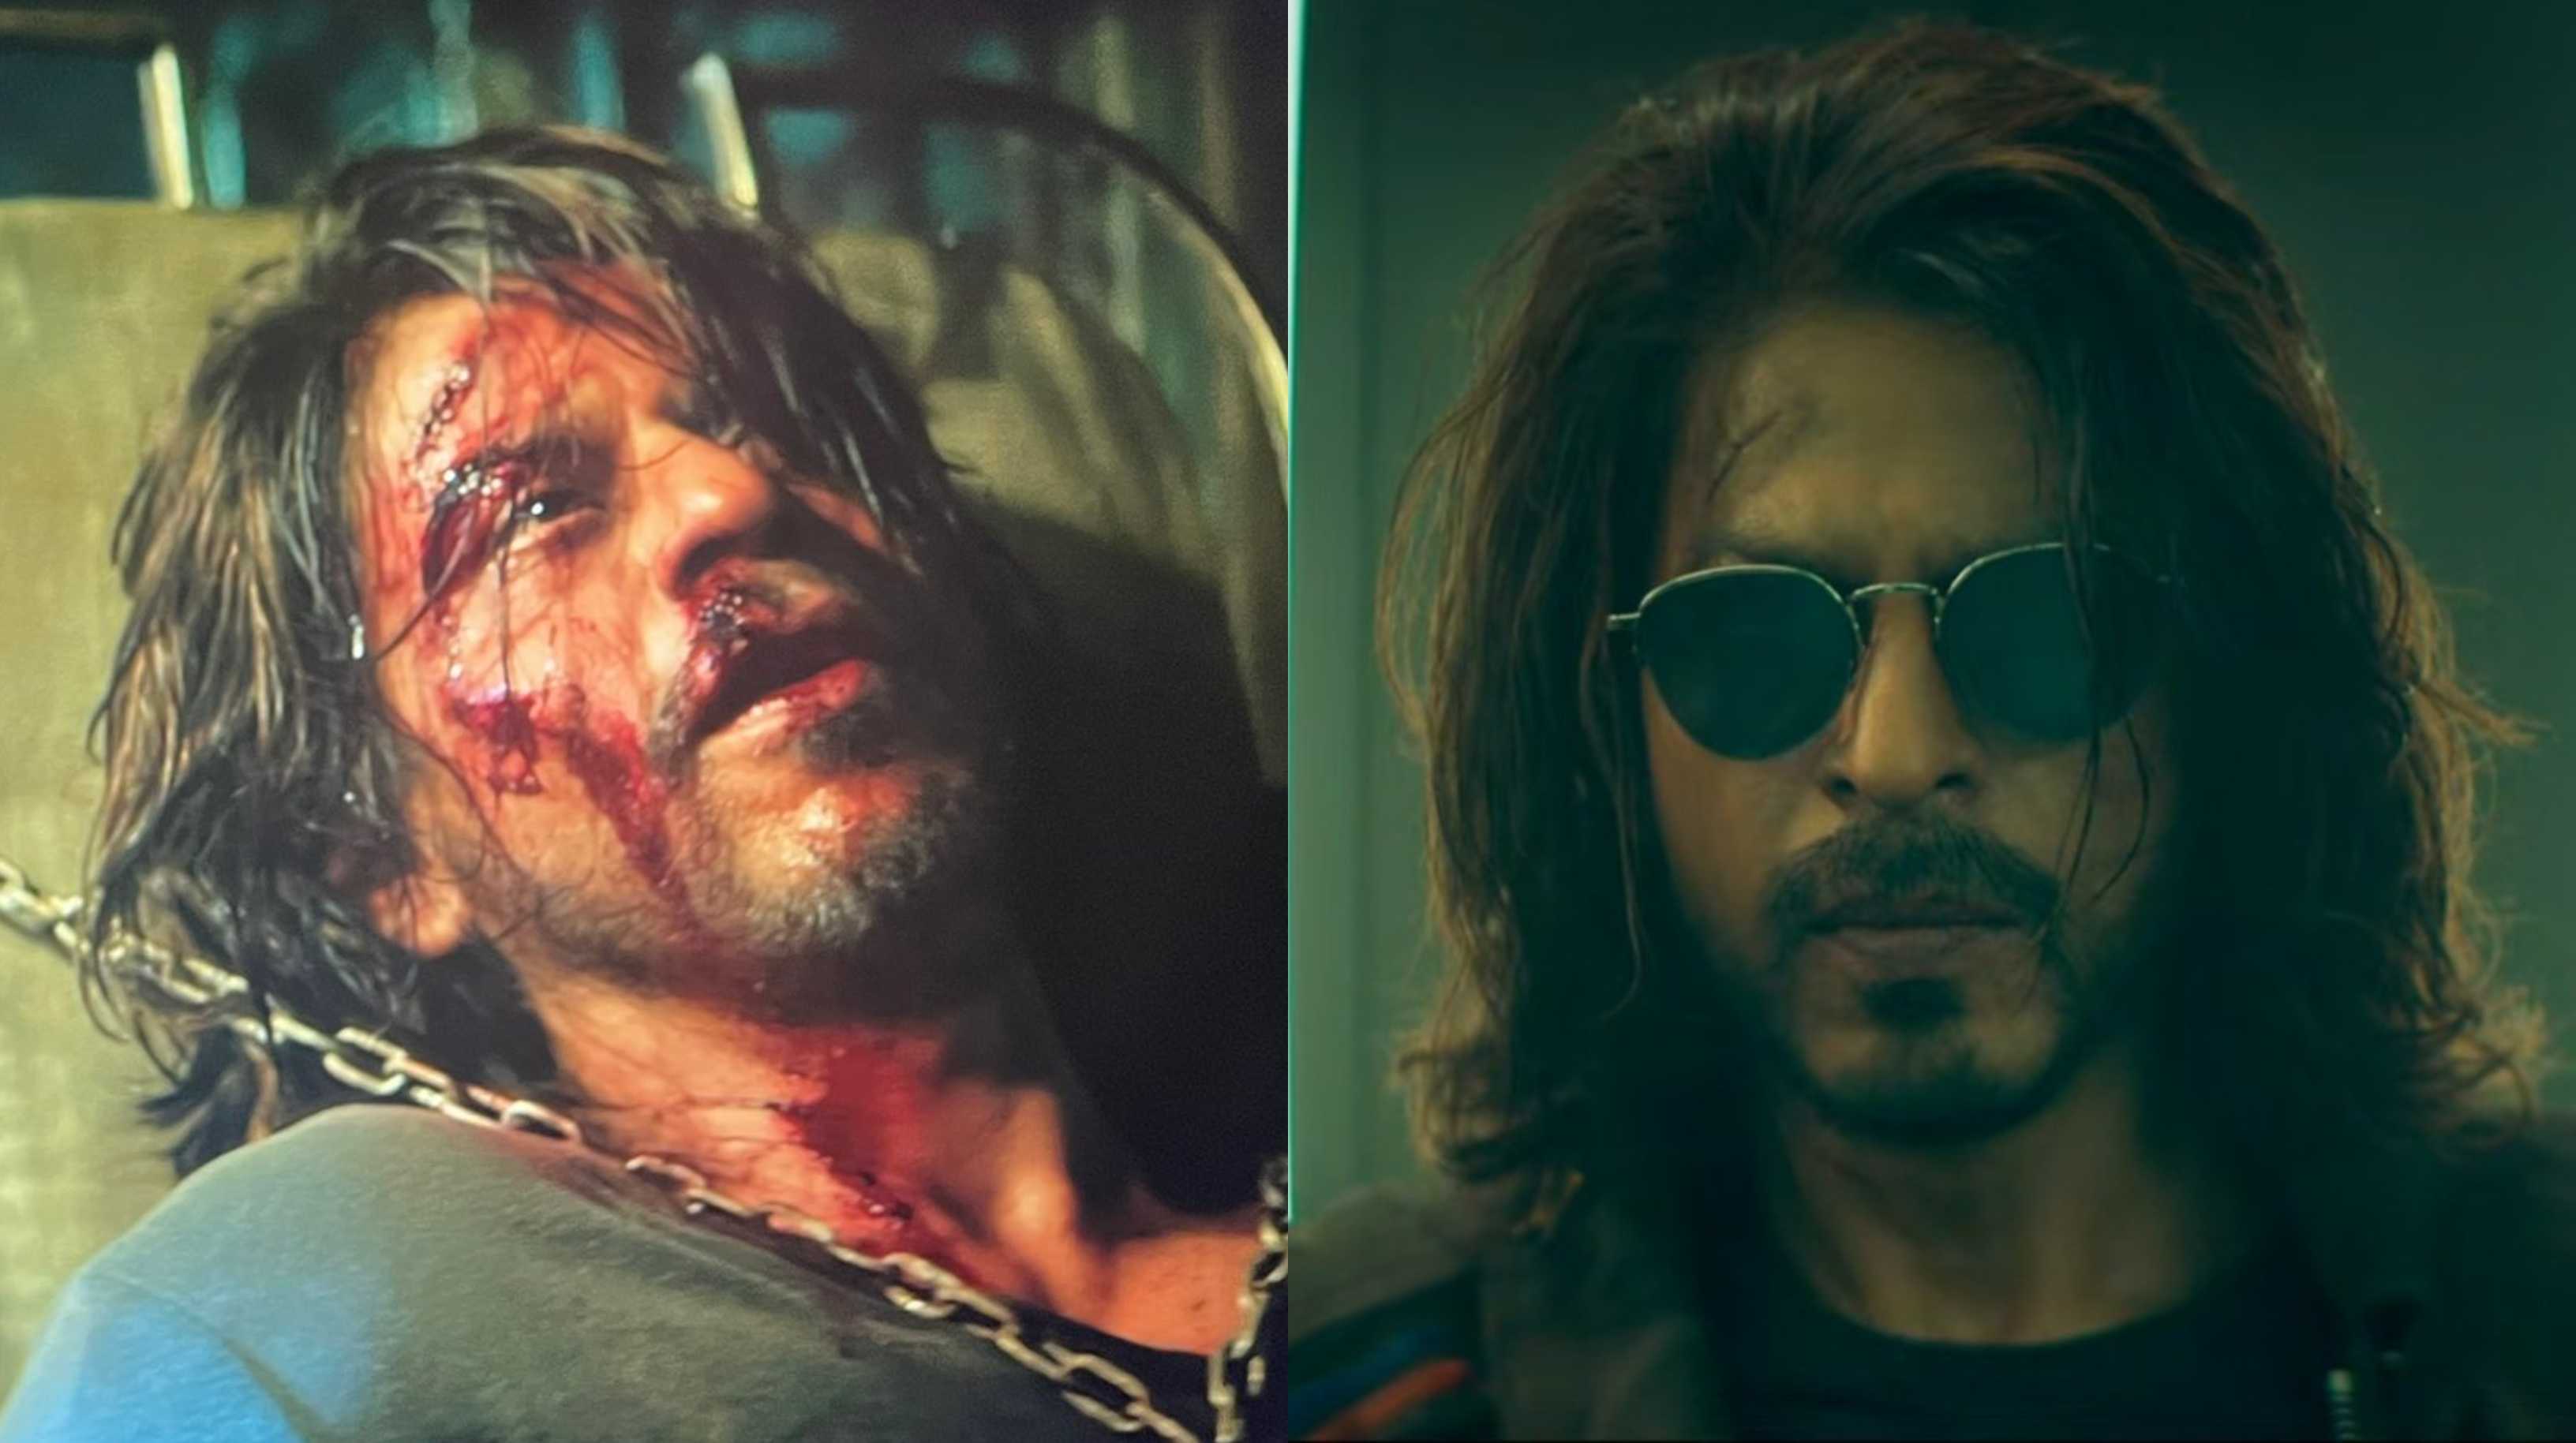 ‘Shouldn't have been edited’: Shah Rukh Khan fans go gaga over Pathaan’s extended version on OTT